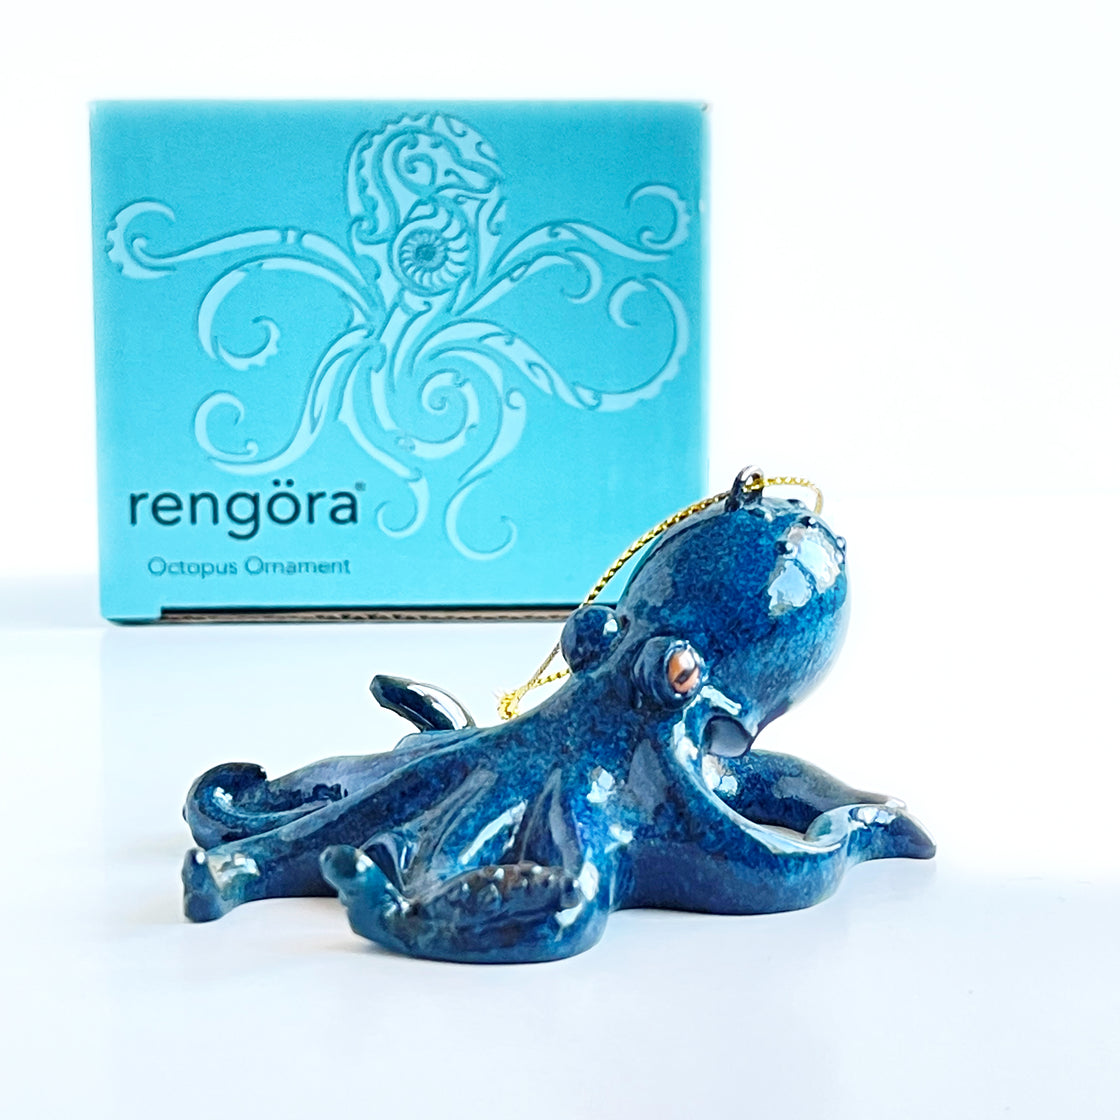 revealing the distinctive packaging of the Rengora octopus ornament against a plain white background